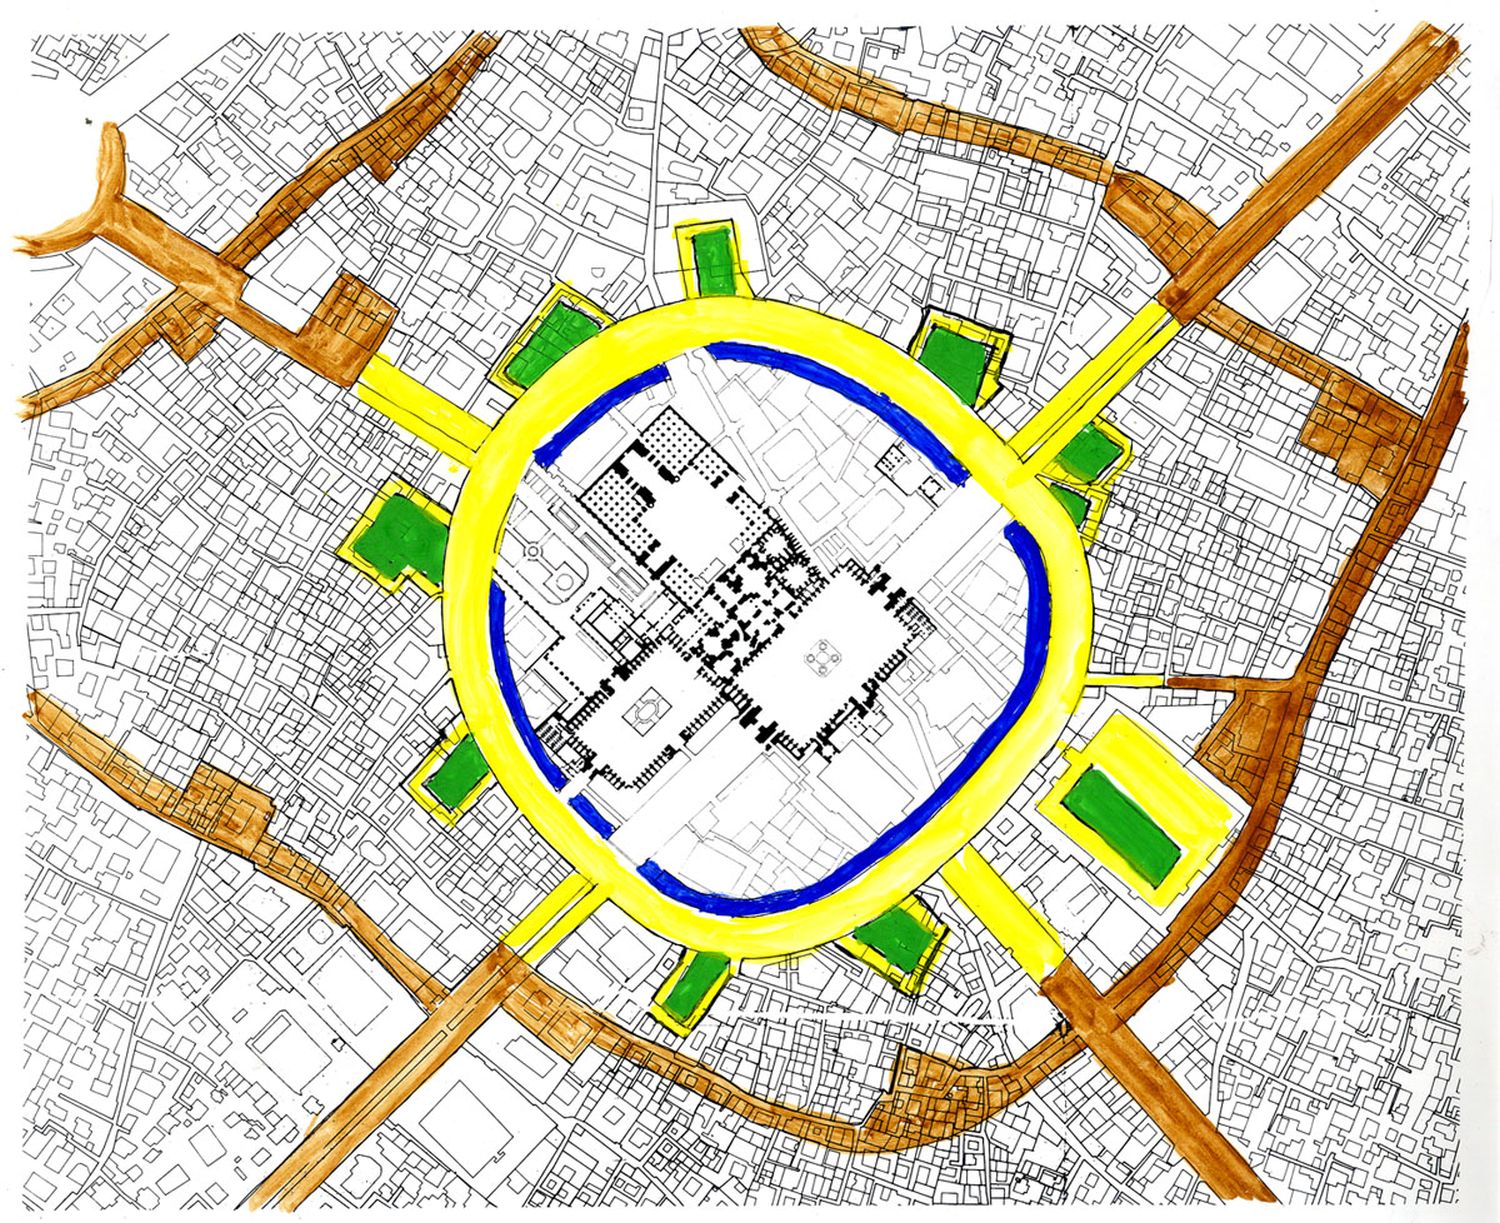 Imam Riza Shrine Complex - Mashhad center renovation project: map of Mashhad town center showing proposed renovations around the Imam Riza Complex. Proposed water features are indicated in blue; pedestrian zones and parks are indicated in yellow and green; arterial routes are indicated in brown.